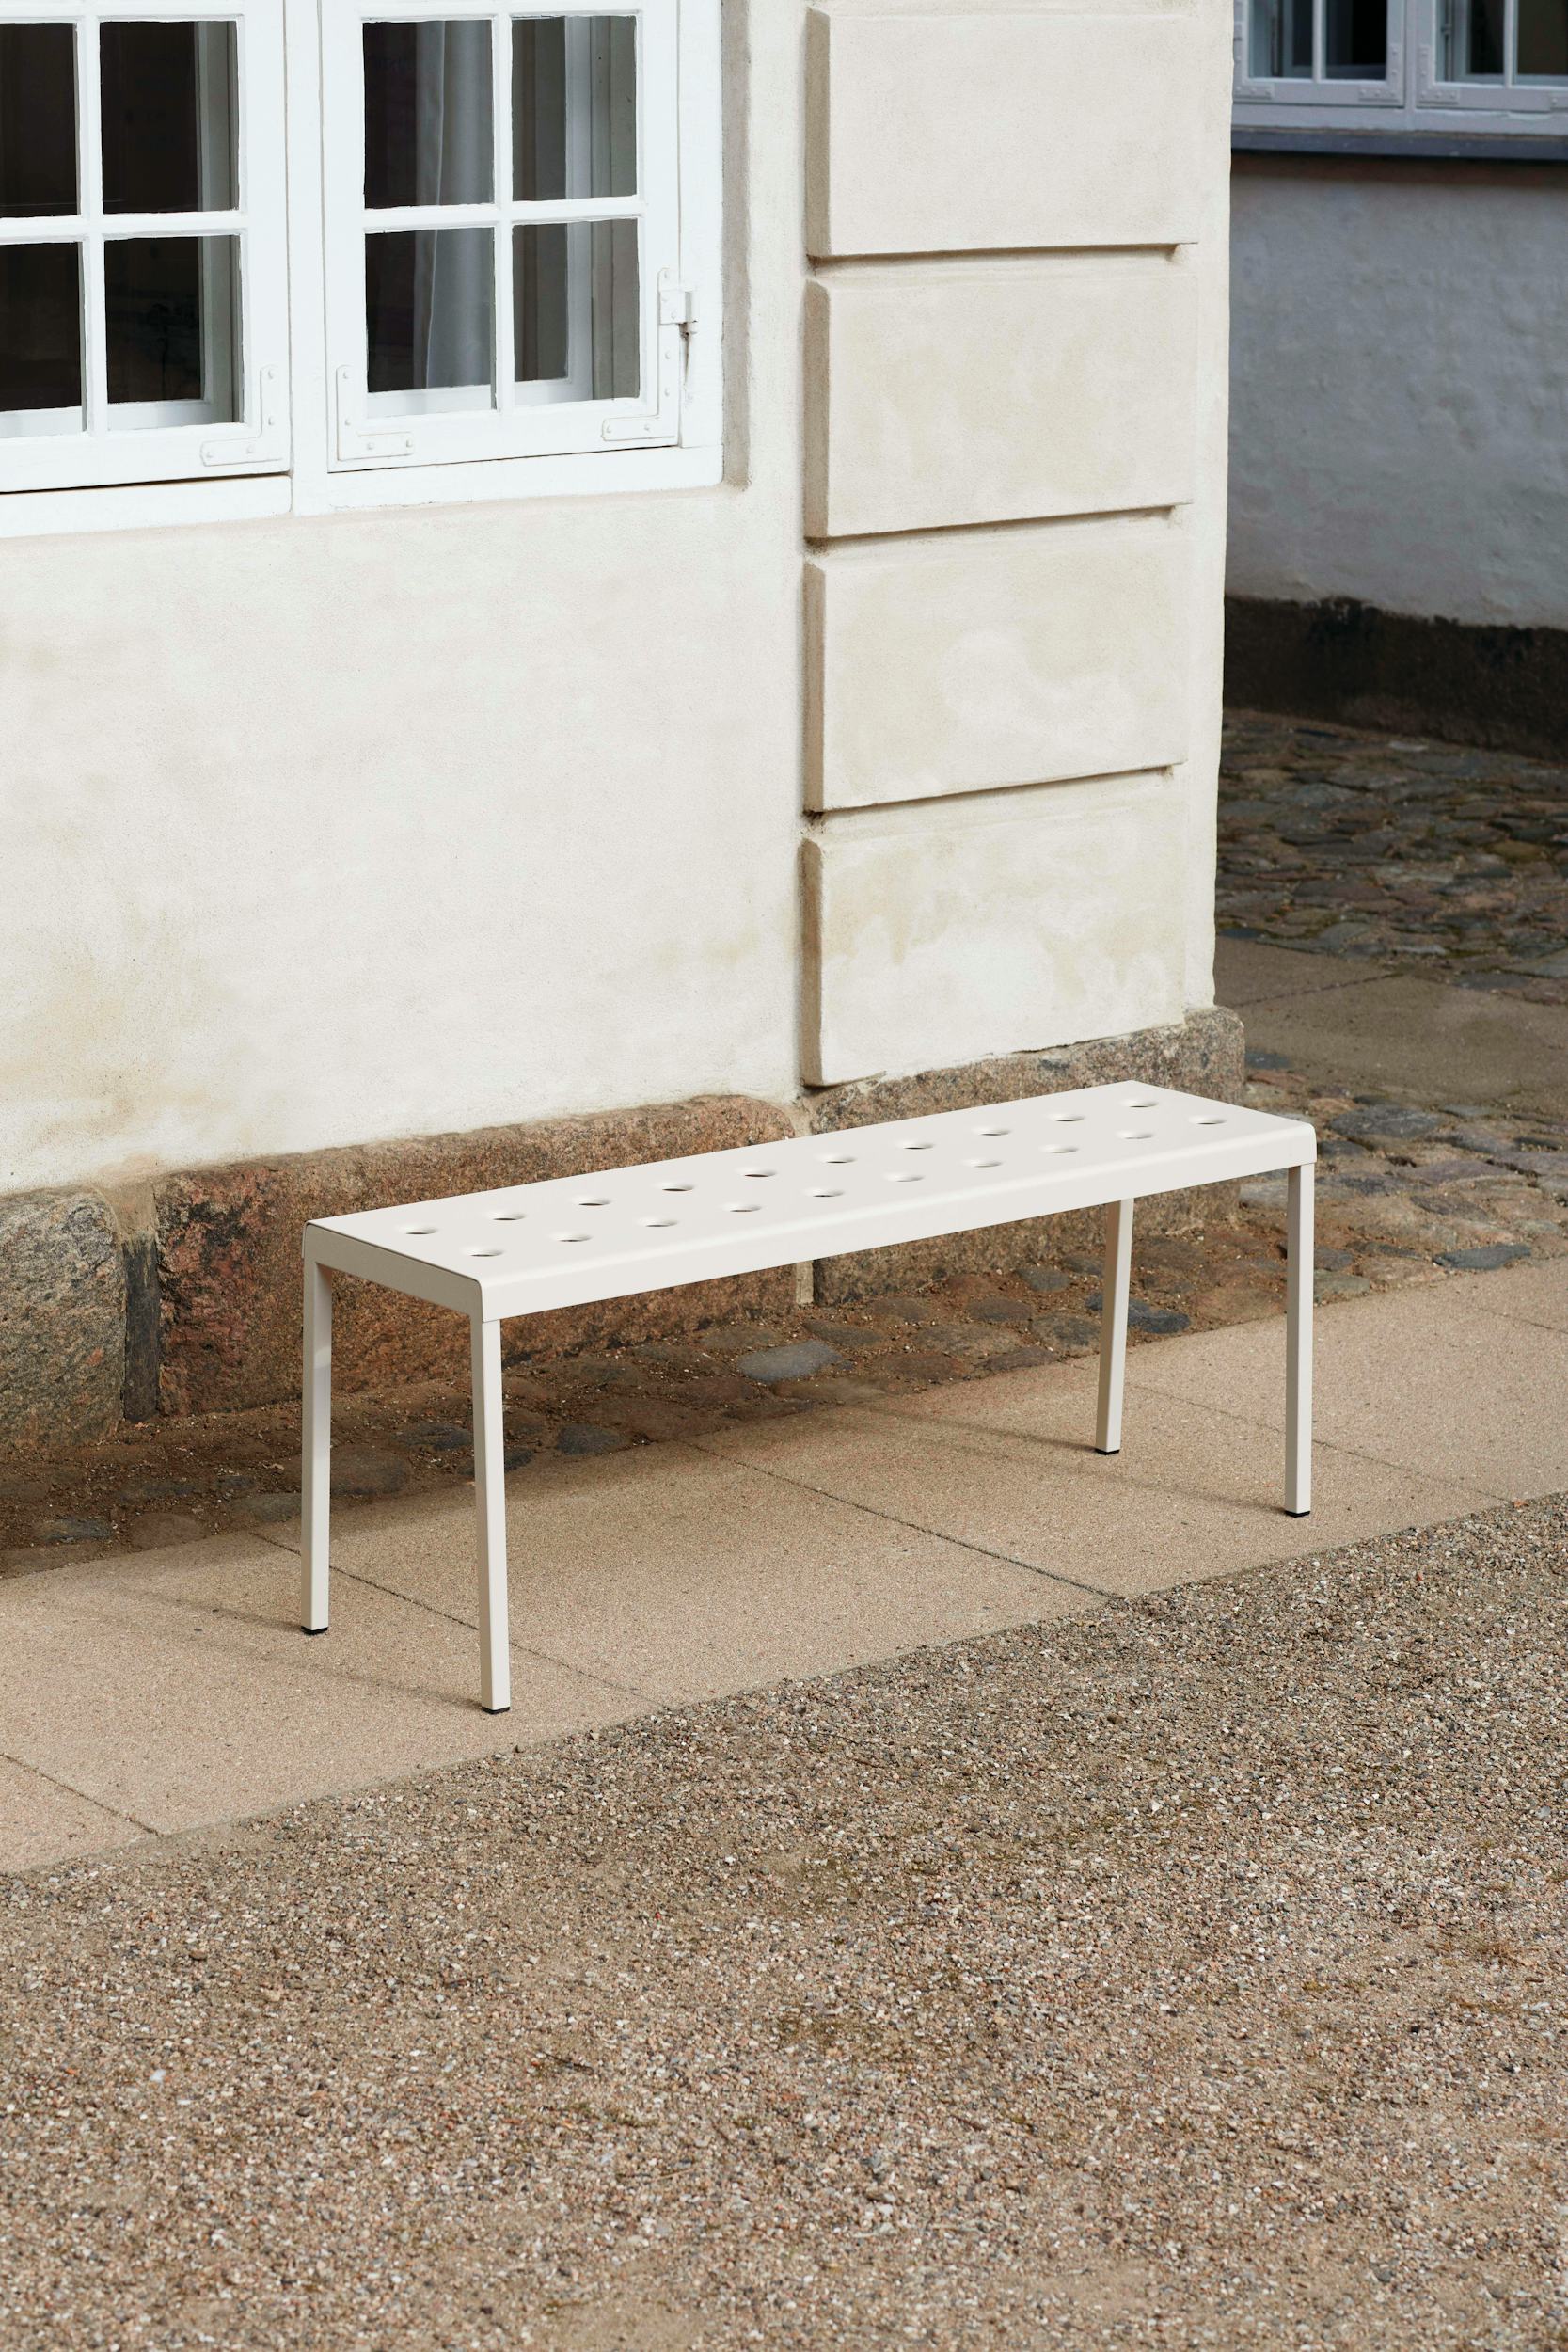 Balcony Backless – Within Reach Design Bench